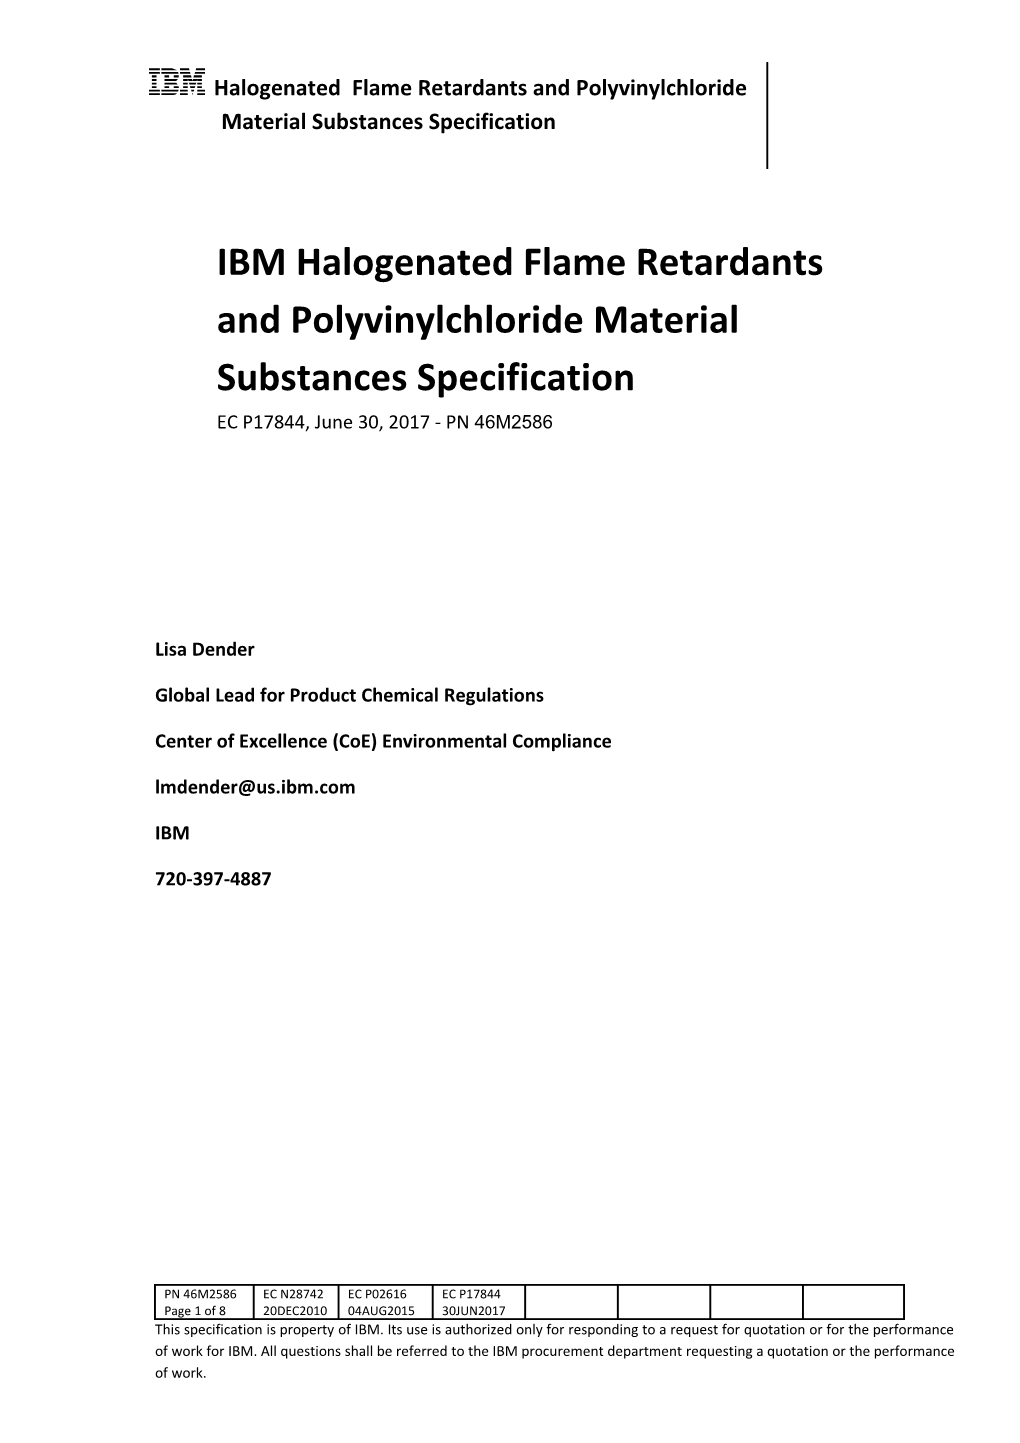 IBM Halogen and Polyvinylchloride Material Substances Specification